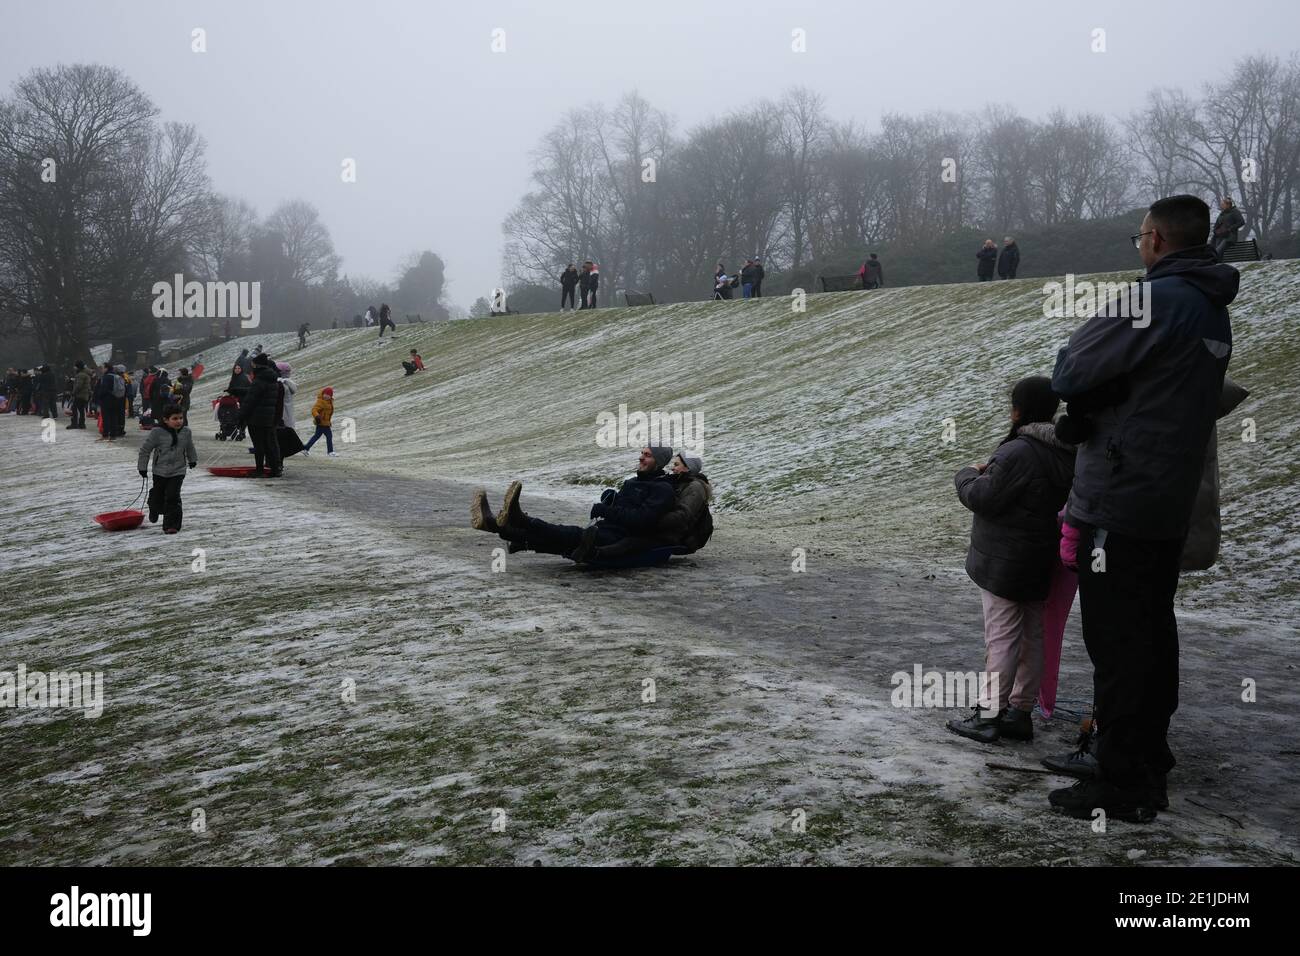 Glasgow, UK, 7 January 2021. People enjoy the fresh air, light snow and misty conditions, an escape from lockdown, with a trip to Queen's Park in the south of the city. Photo credit: Jeremy Sutton-Hibbert/Alamy Live News Stock Photo